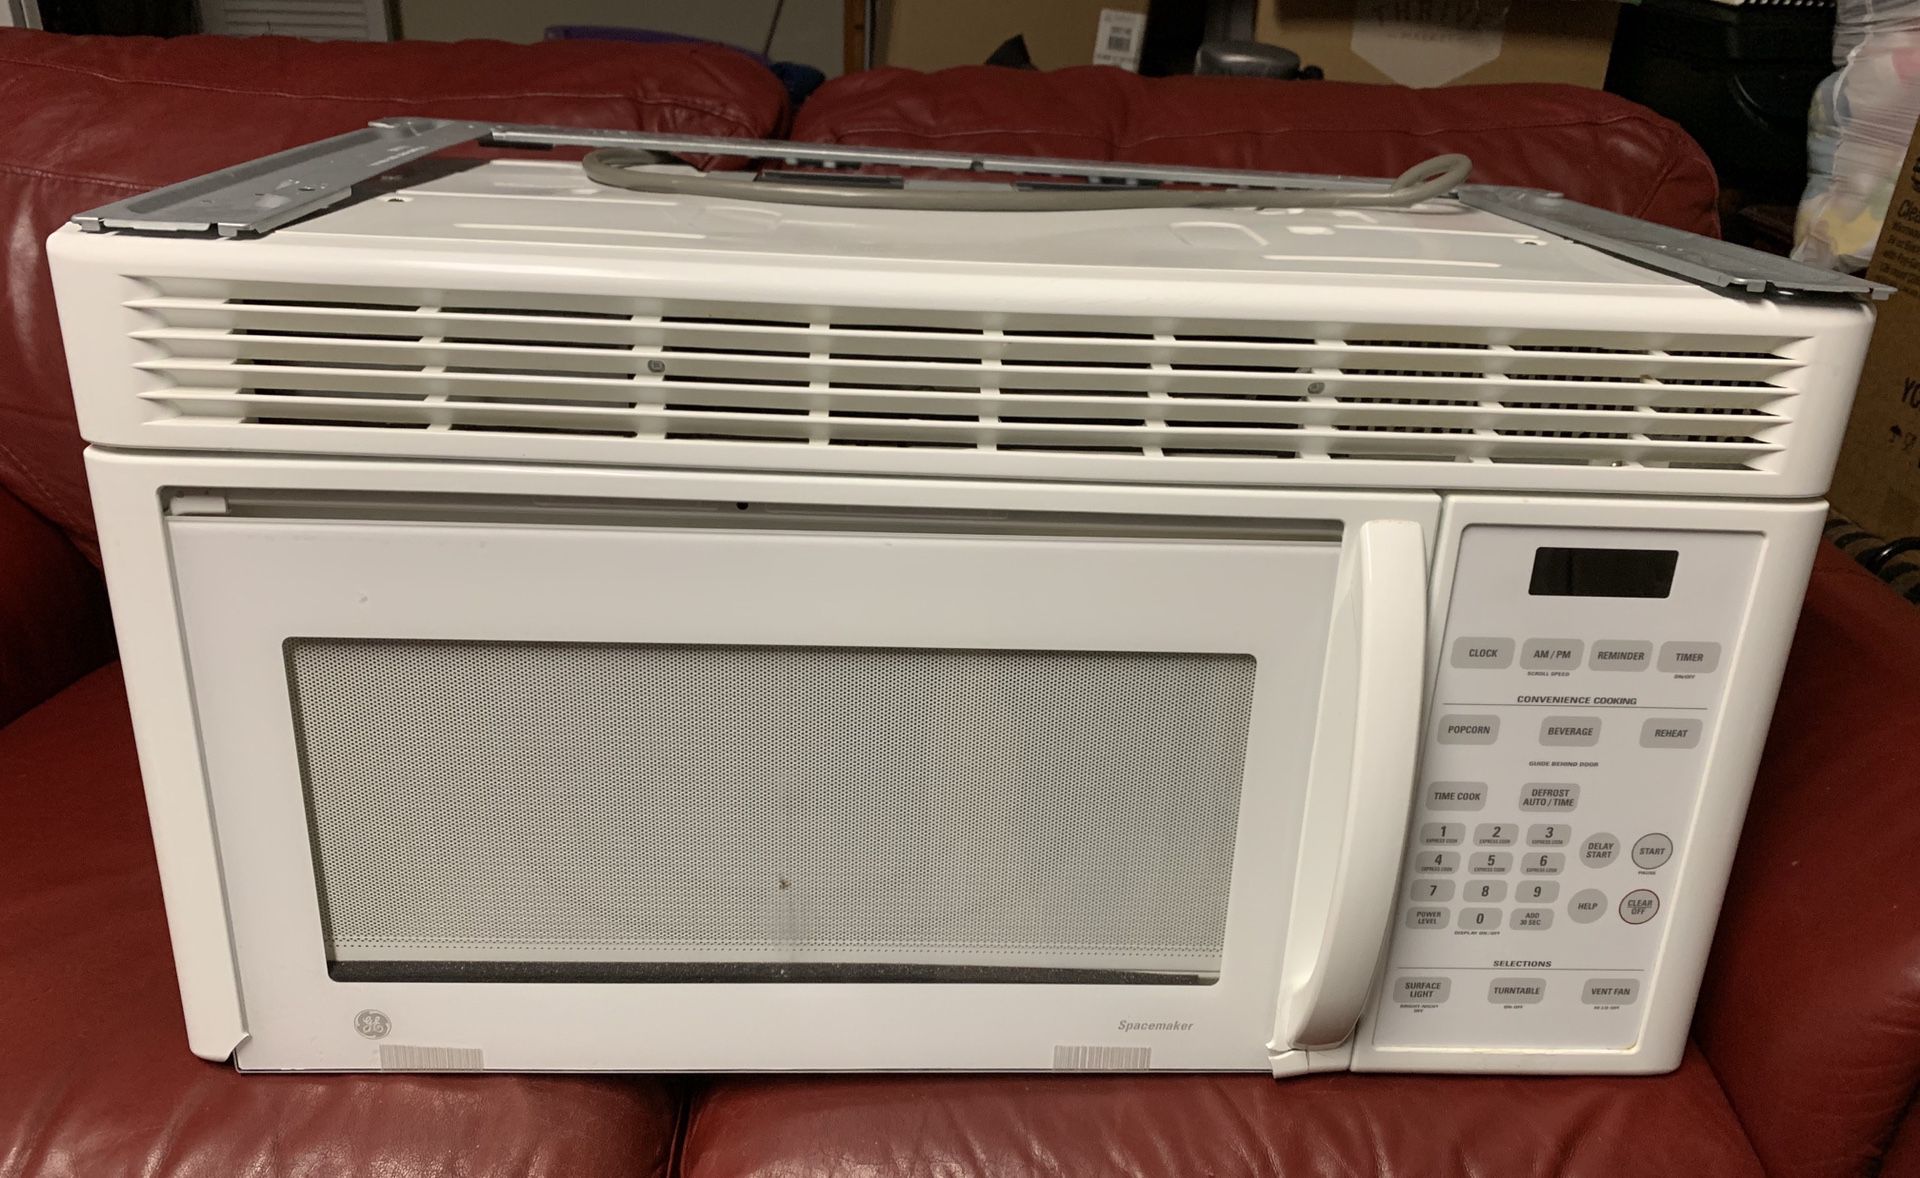 GE General Electric Spacemaker White Built In Microwave. (2 years old, great condition, We also have a matching Stove)